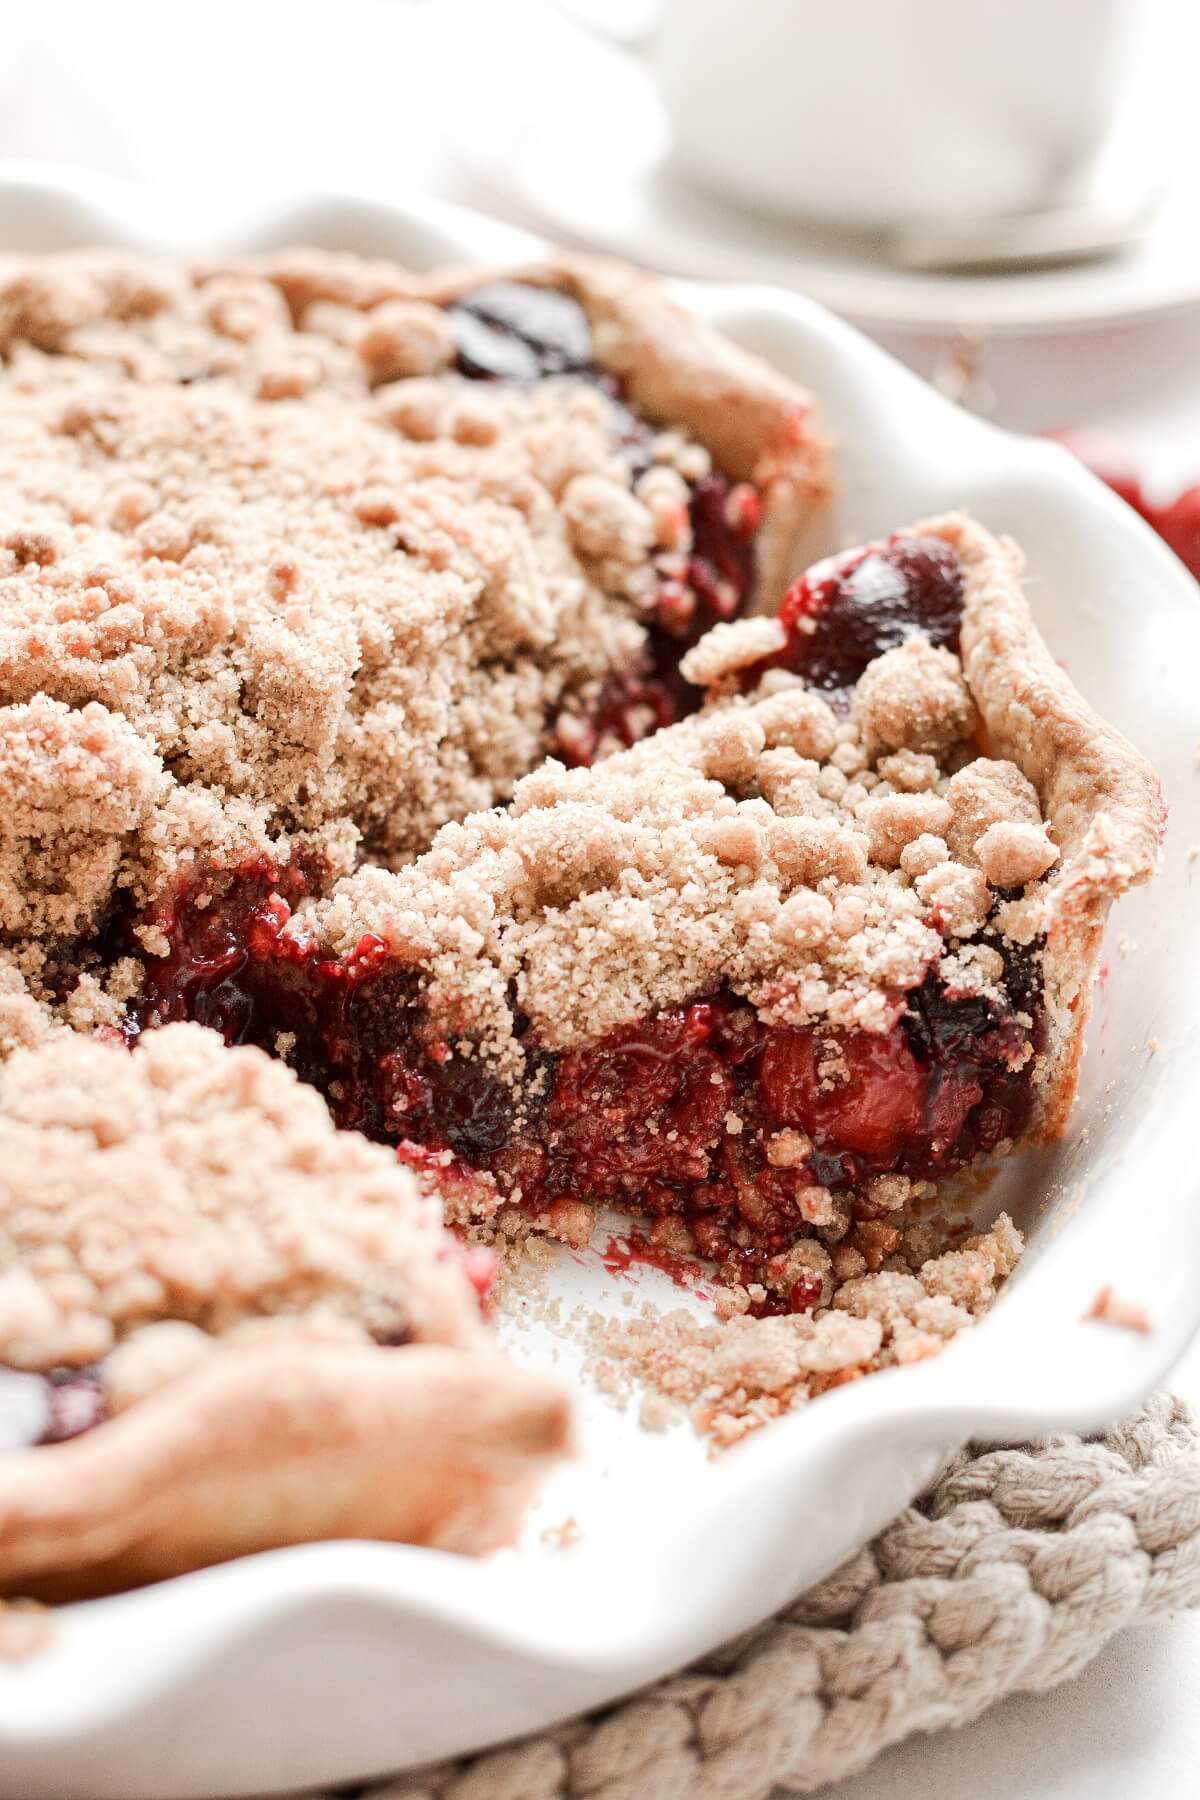 Cherry crumb pie with several slices cut.